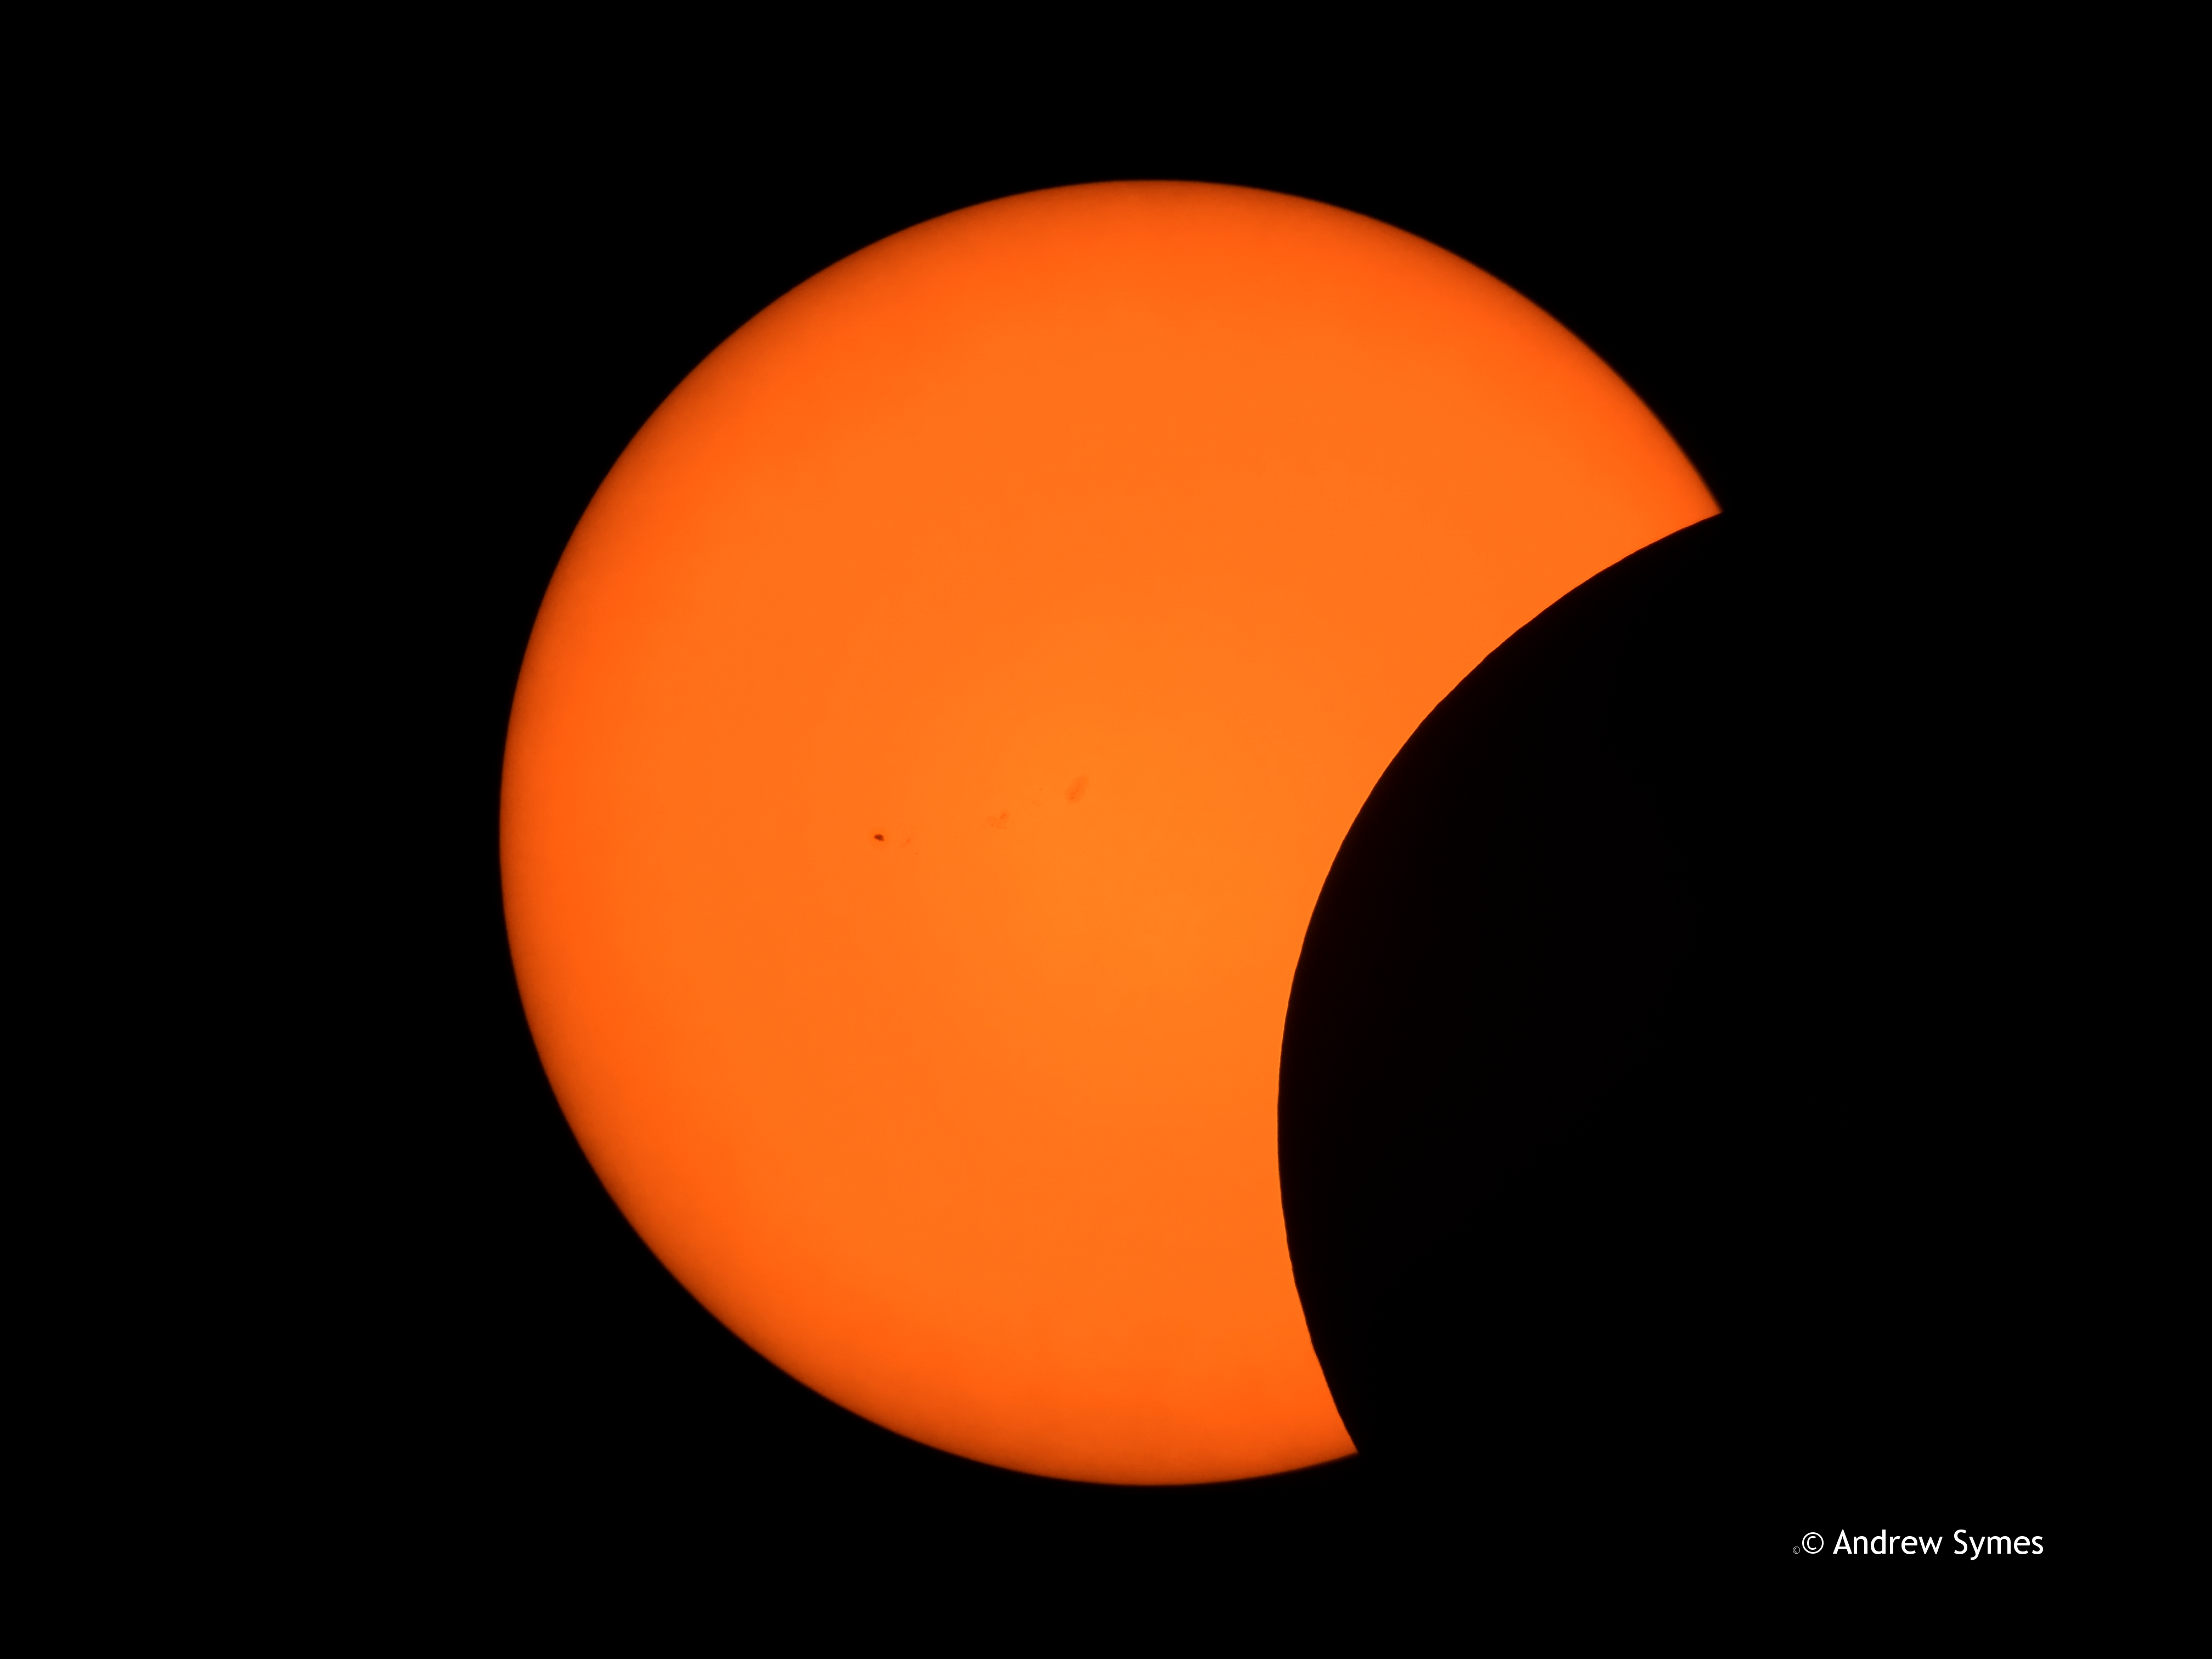 SolarEclipseSymes_300pm_Aug21_2017_1_watermark.png